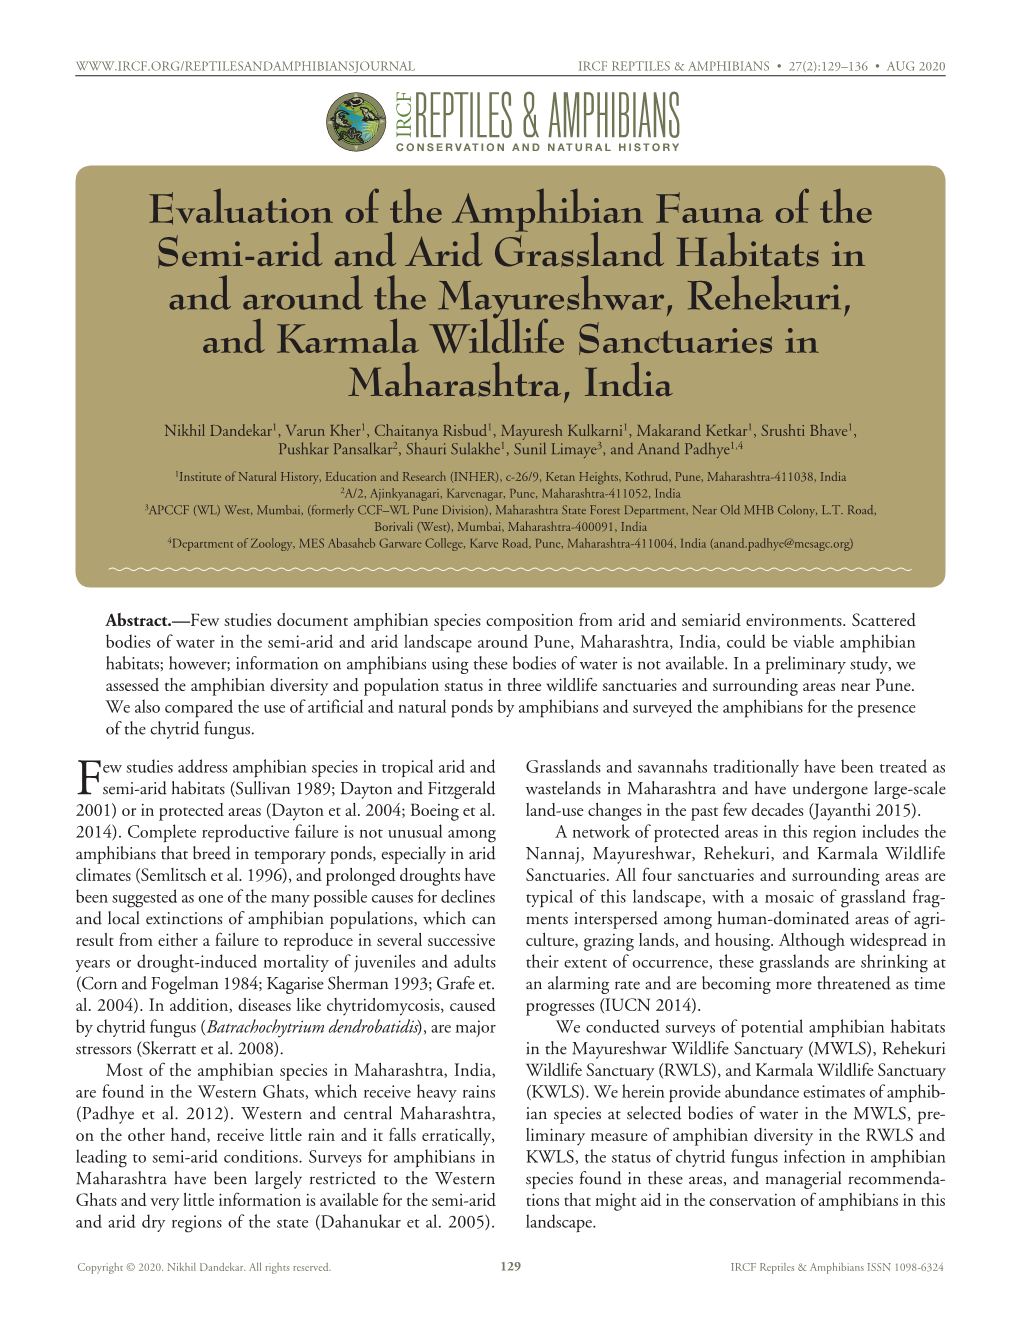 Evaluation of the Amphibian Fauna of The